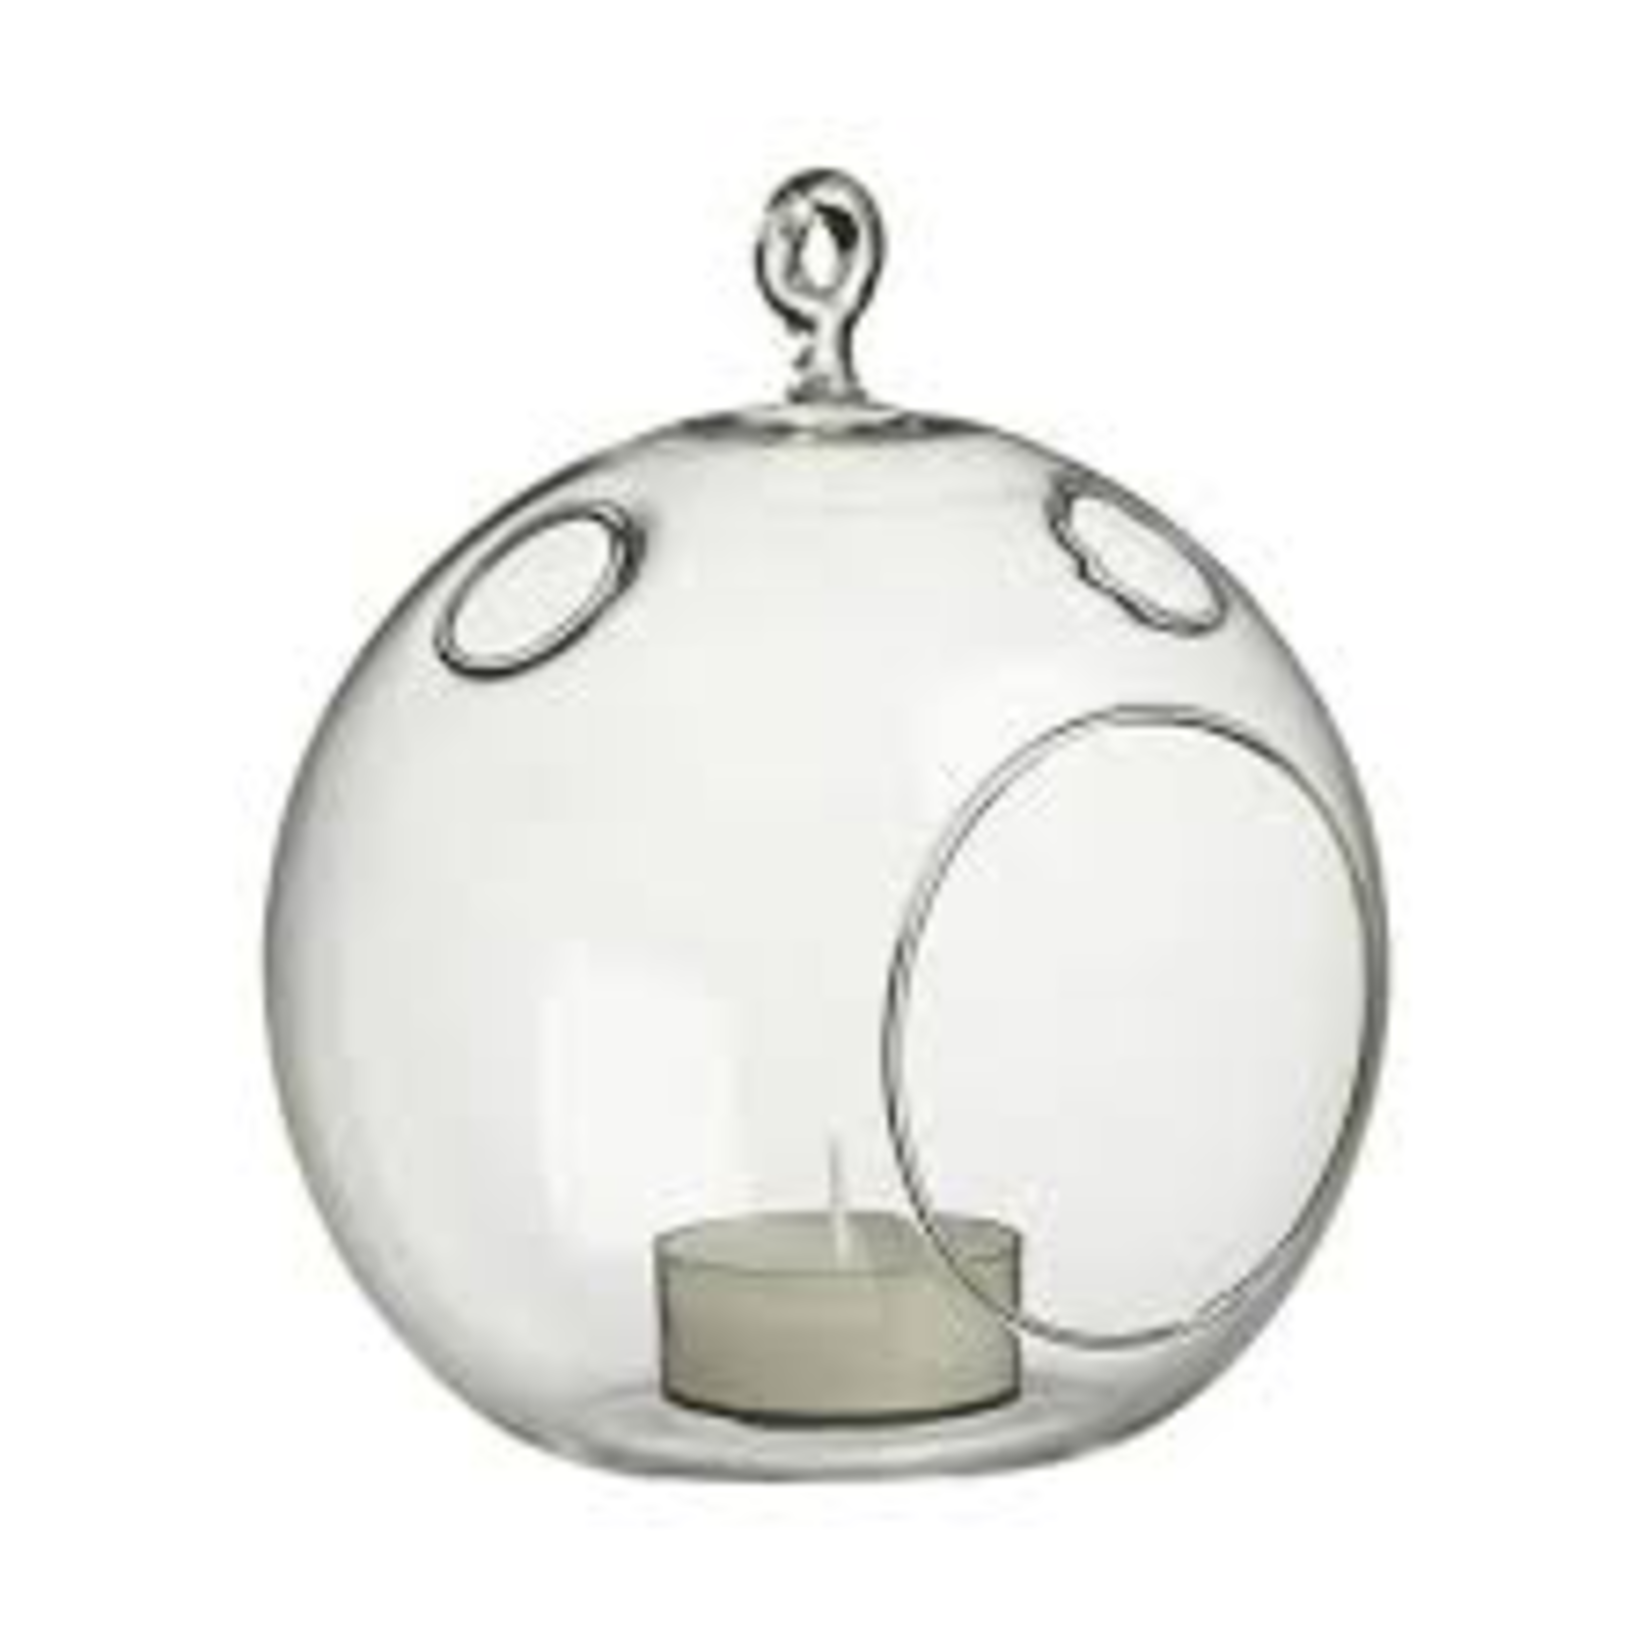 Clear Round Hanging Votive Candle Holder / Vase. Width: 7.5" Height: 9" Open: 3.5"